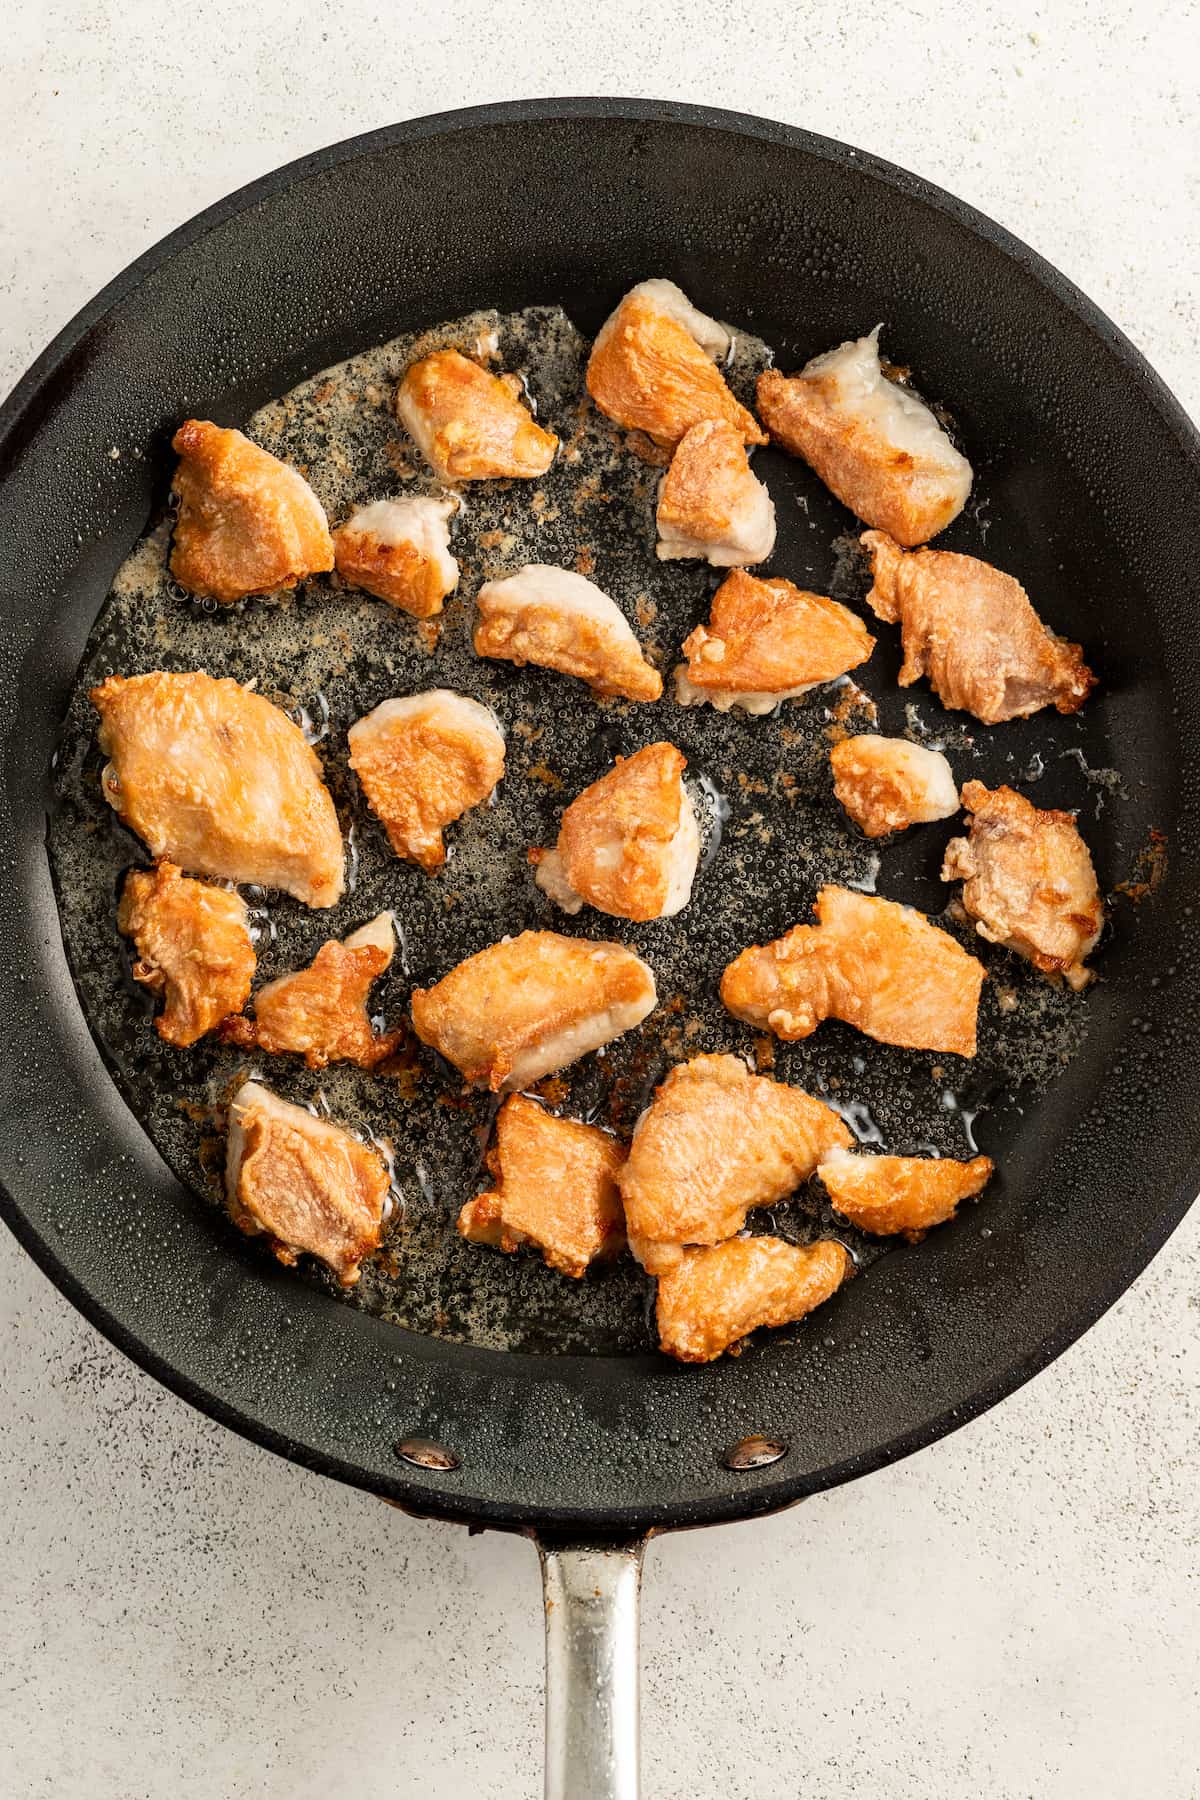 Frying the chicken.